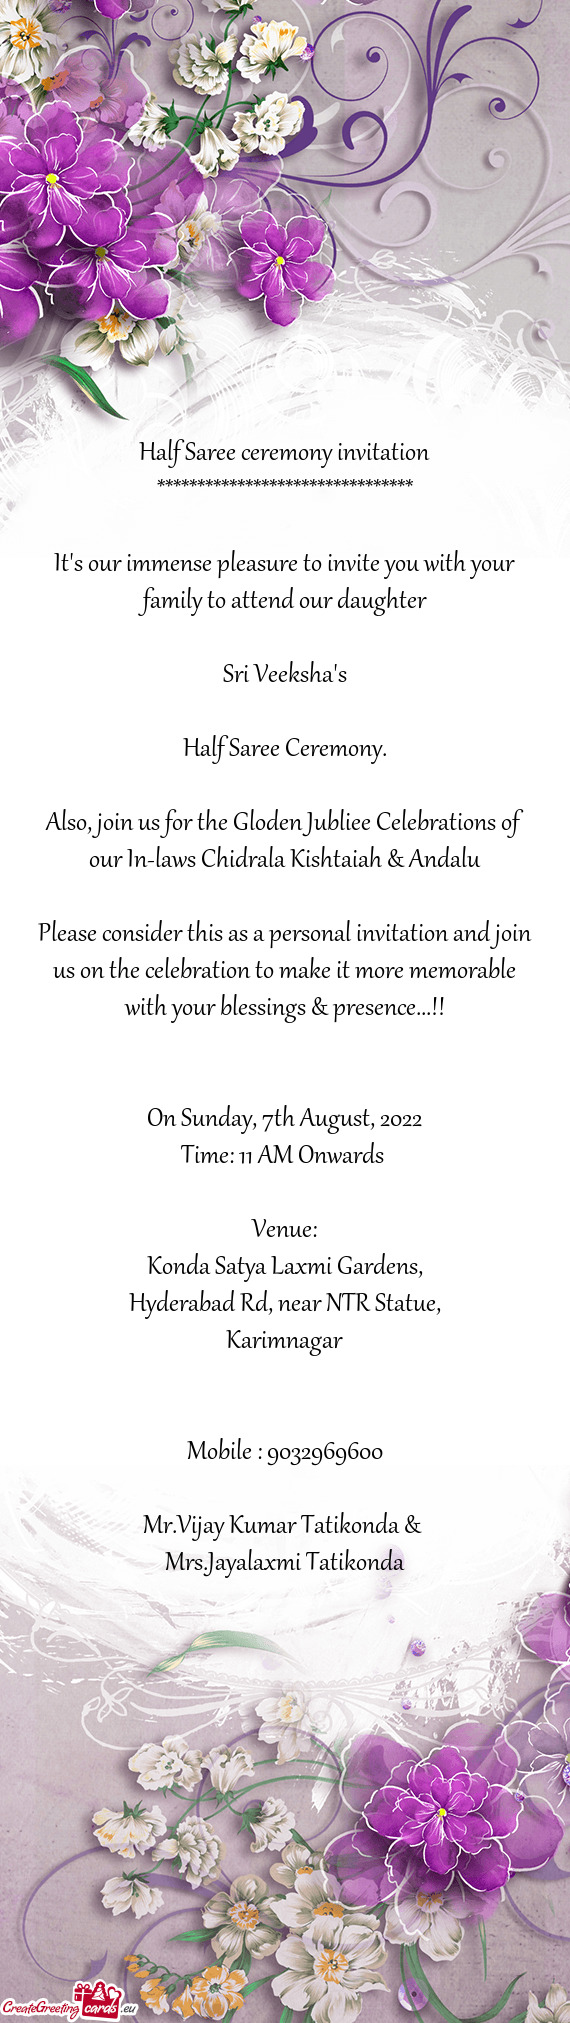 Also, join us for the Gloden Jubliee Celebrations of our In-laws Chidrala Kishtaiah & Andalu